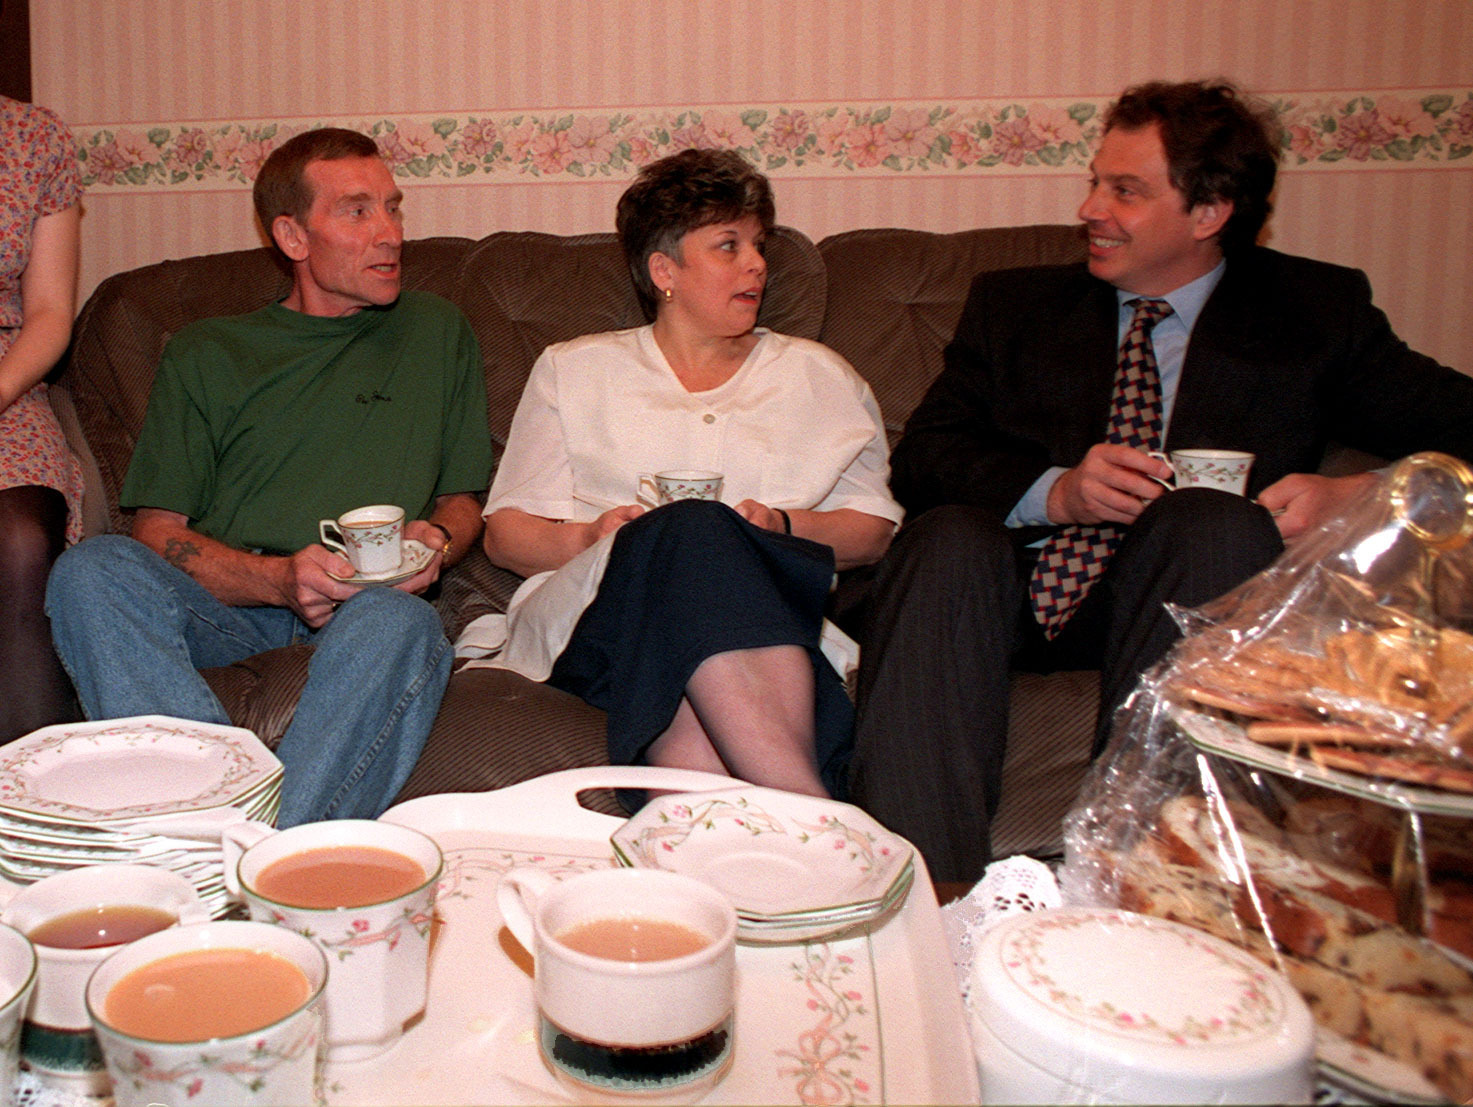 Welcoming - Tony Blair enjoyed tea with Mick Ryan and his wife Pat as he campaigned in Basildon in 1996